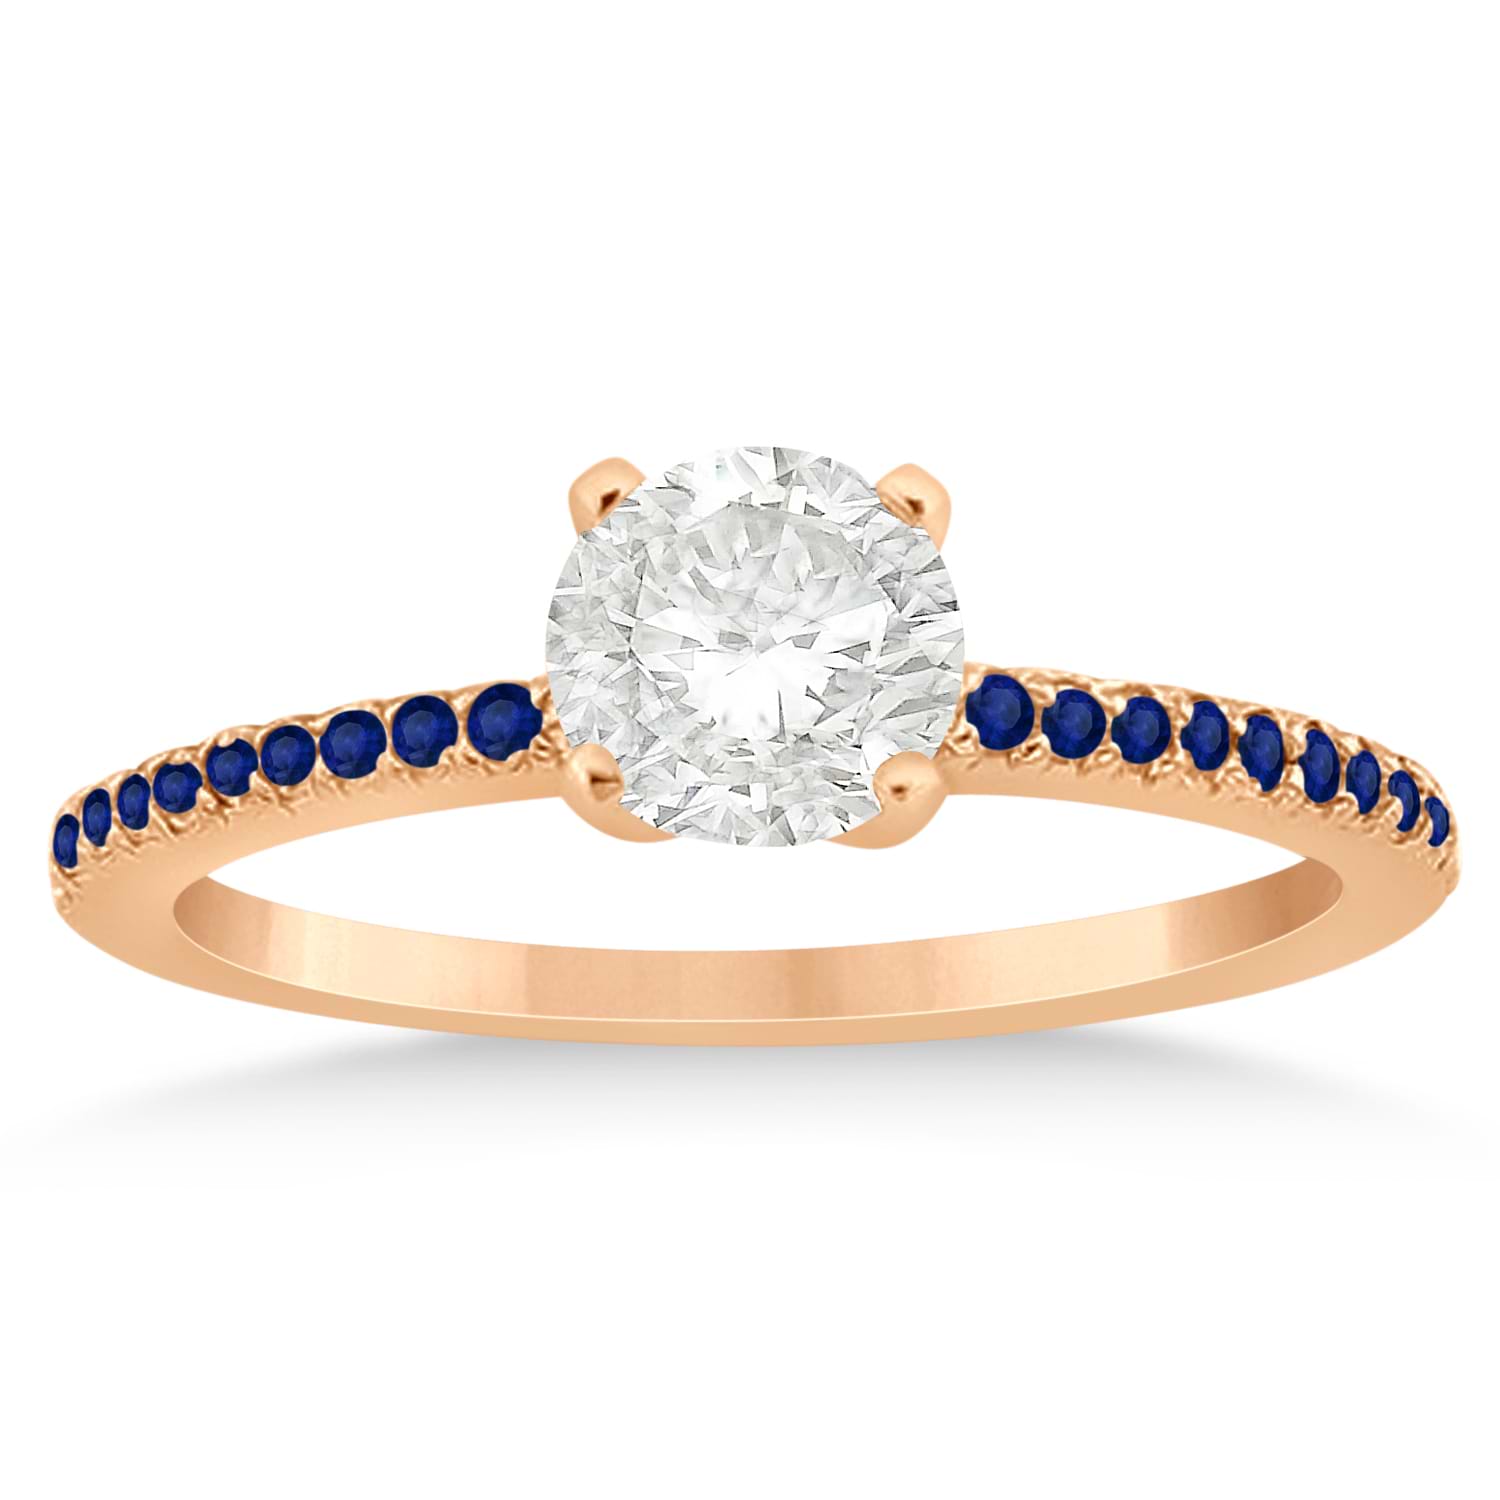 Blue Sapphire Accented Engagement Ring Setting 18k Rose Gold 0.18ct